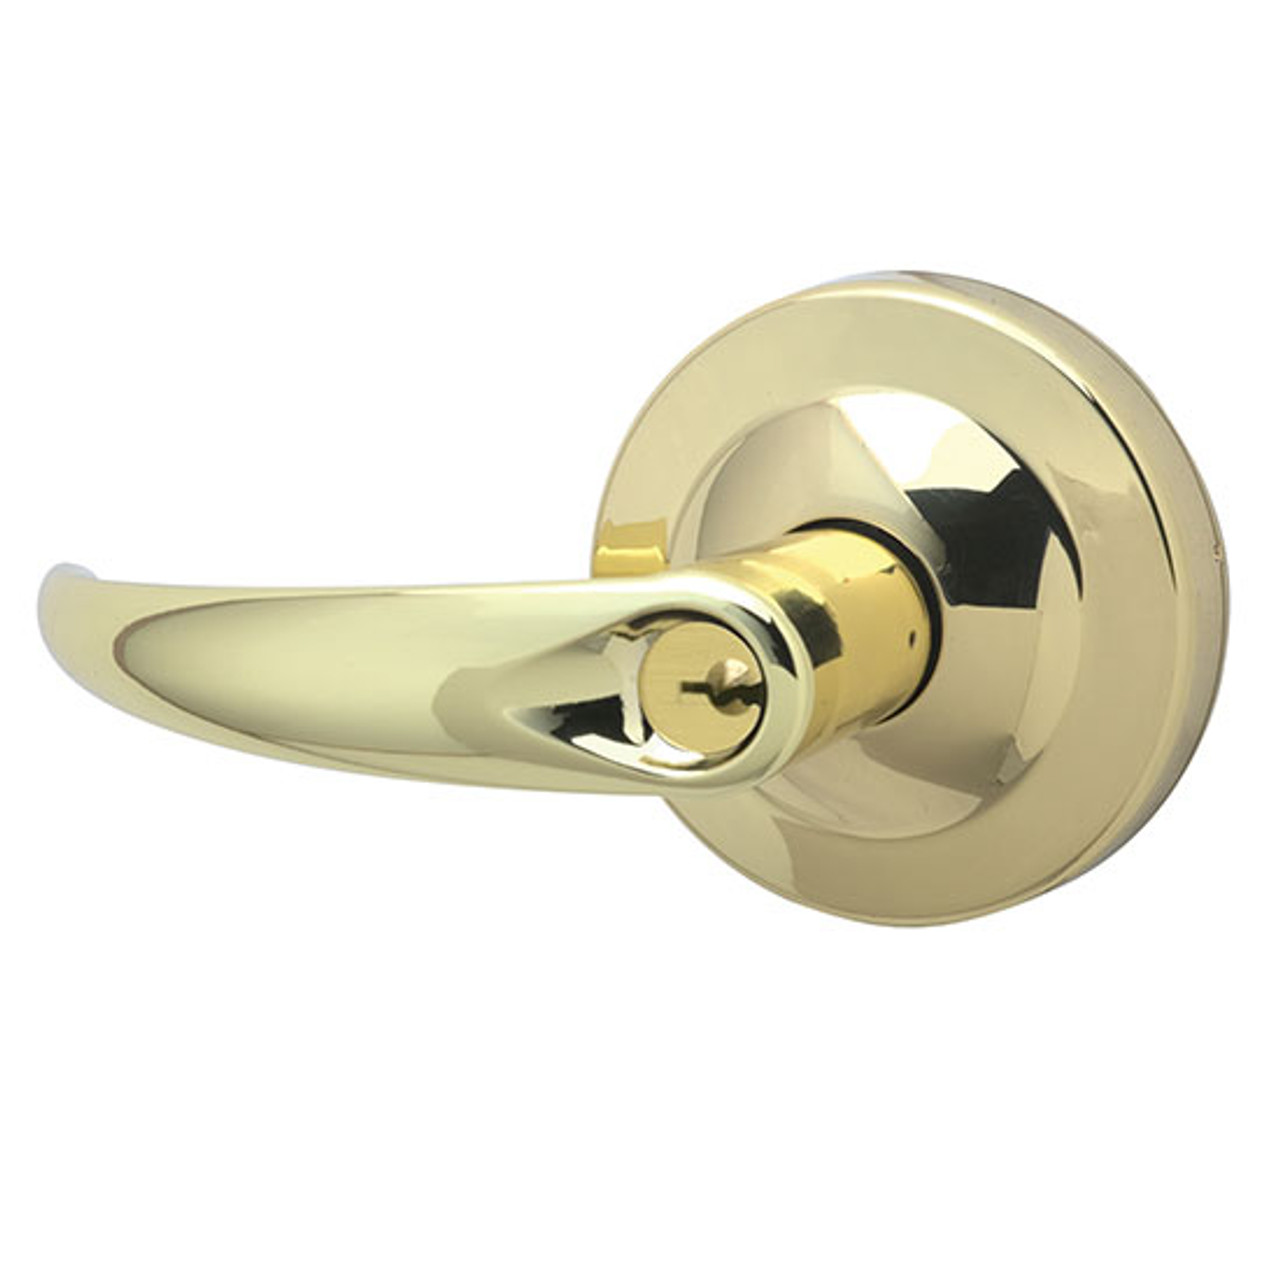 ALX70PD-OME-605 Schlage Omega Cylindrical Lock in Bright Brass